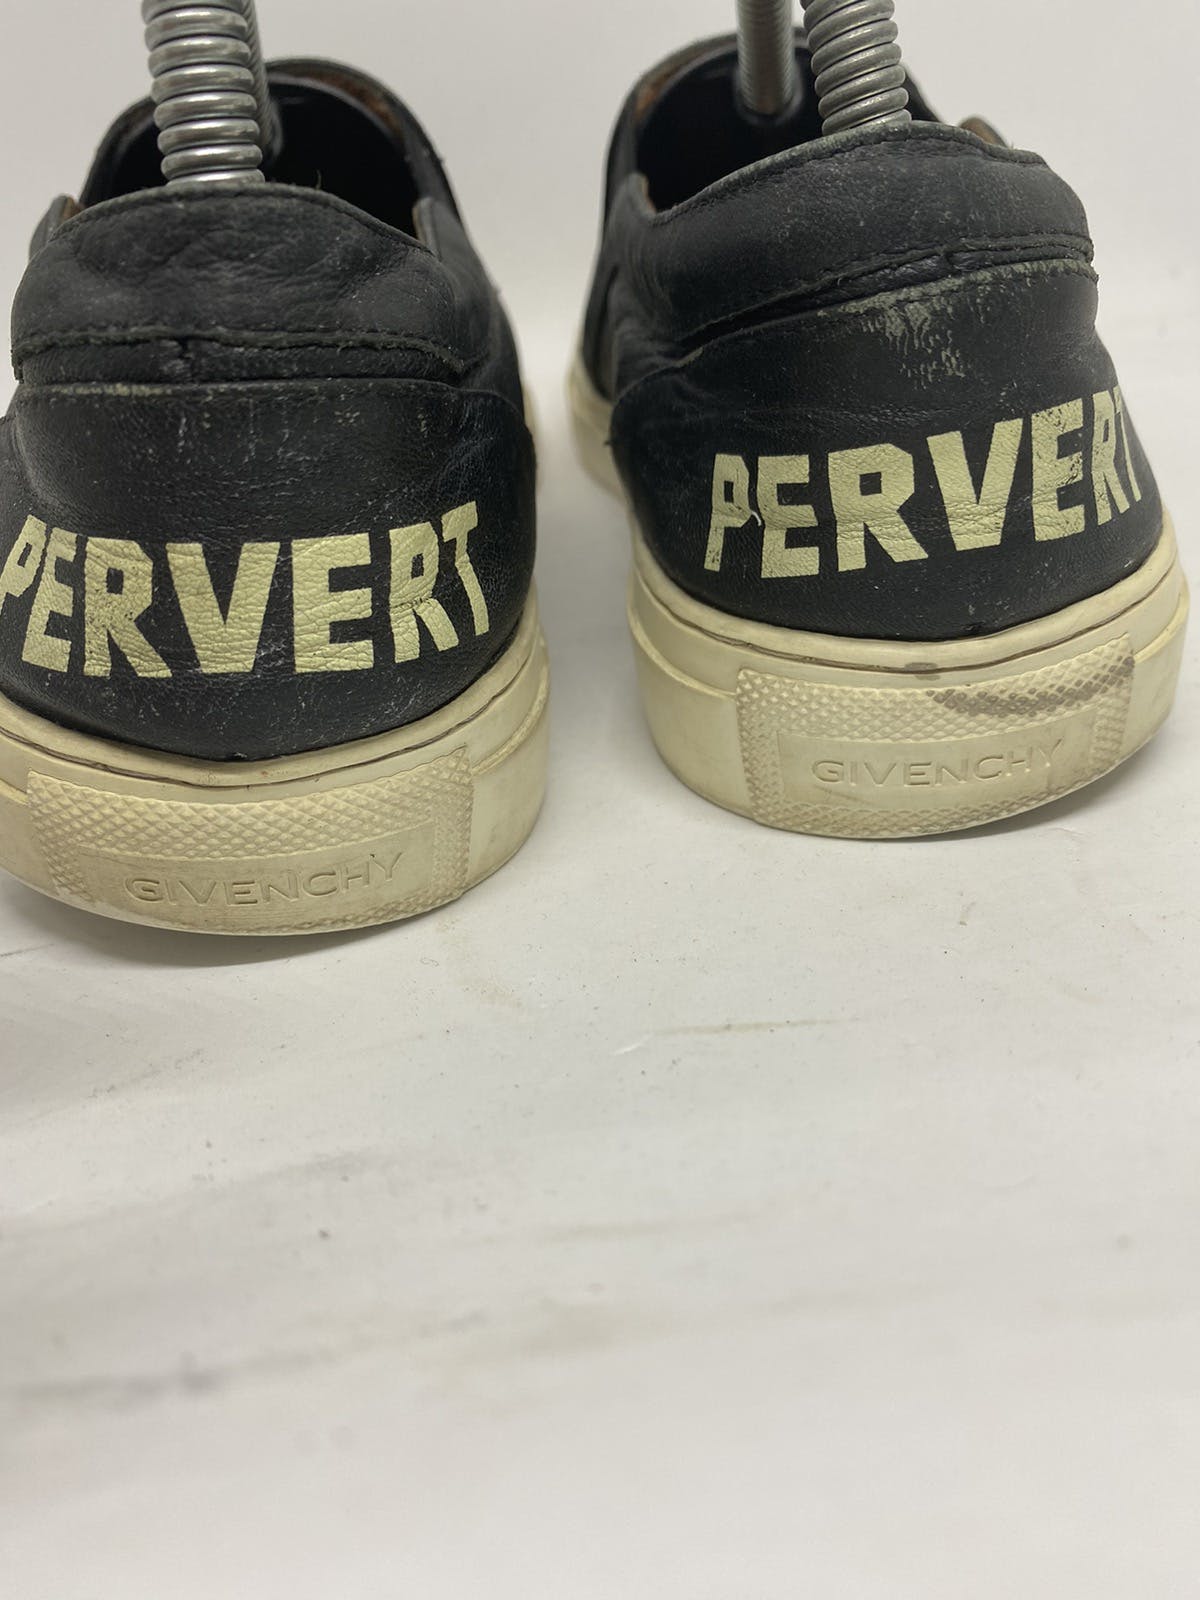 Givenchy pervert 17 slip on sneakers - 5